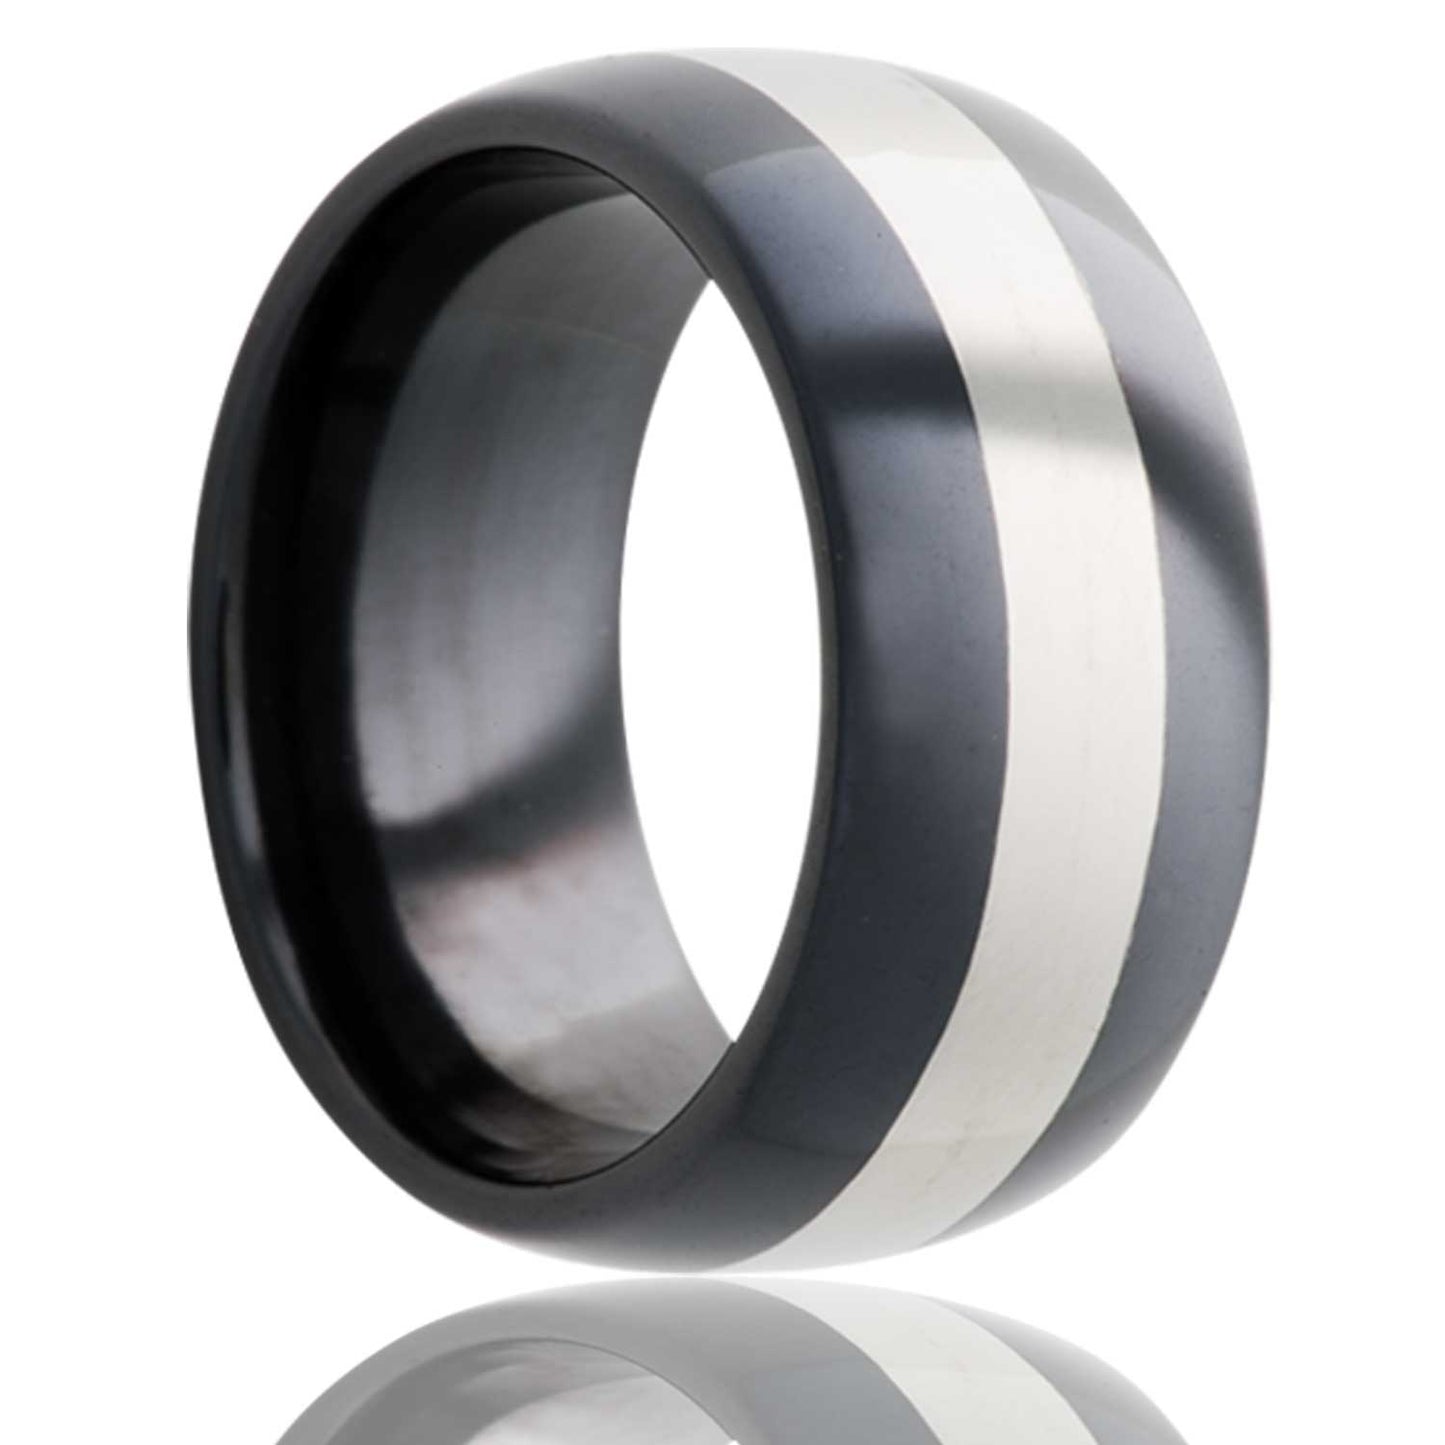 A domed zirconium wedding band with polished stripe displayed on a neutral white background.